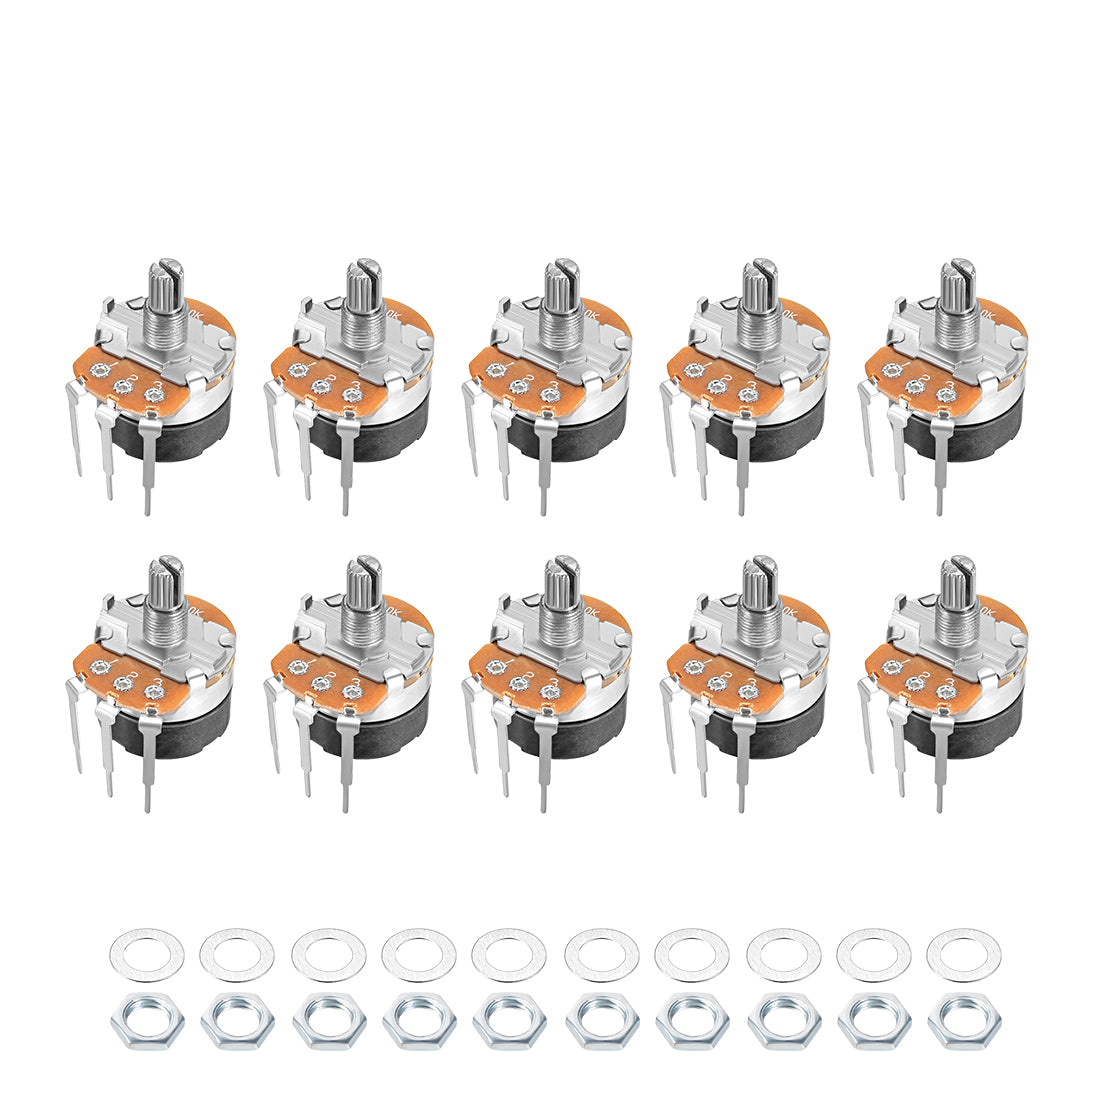 uxcell Uxcell WH138 Potentiometer with Switch B10K Ohm Variable Resistors Single Turn Rotary Carbon Film Taper 10pcs